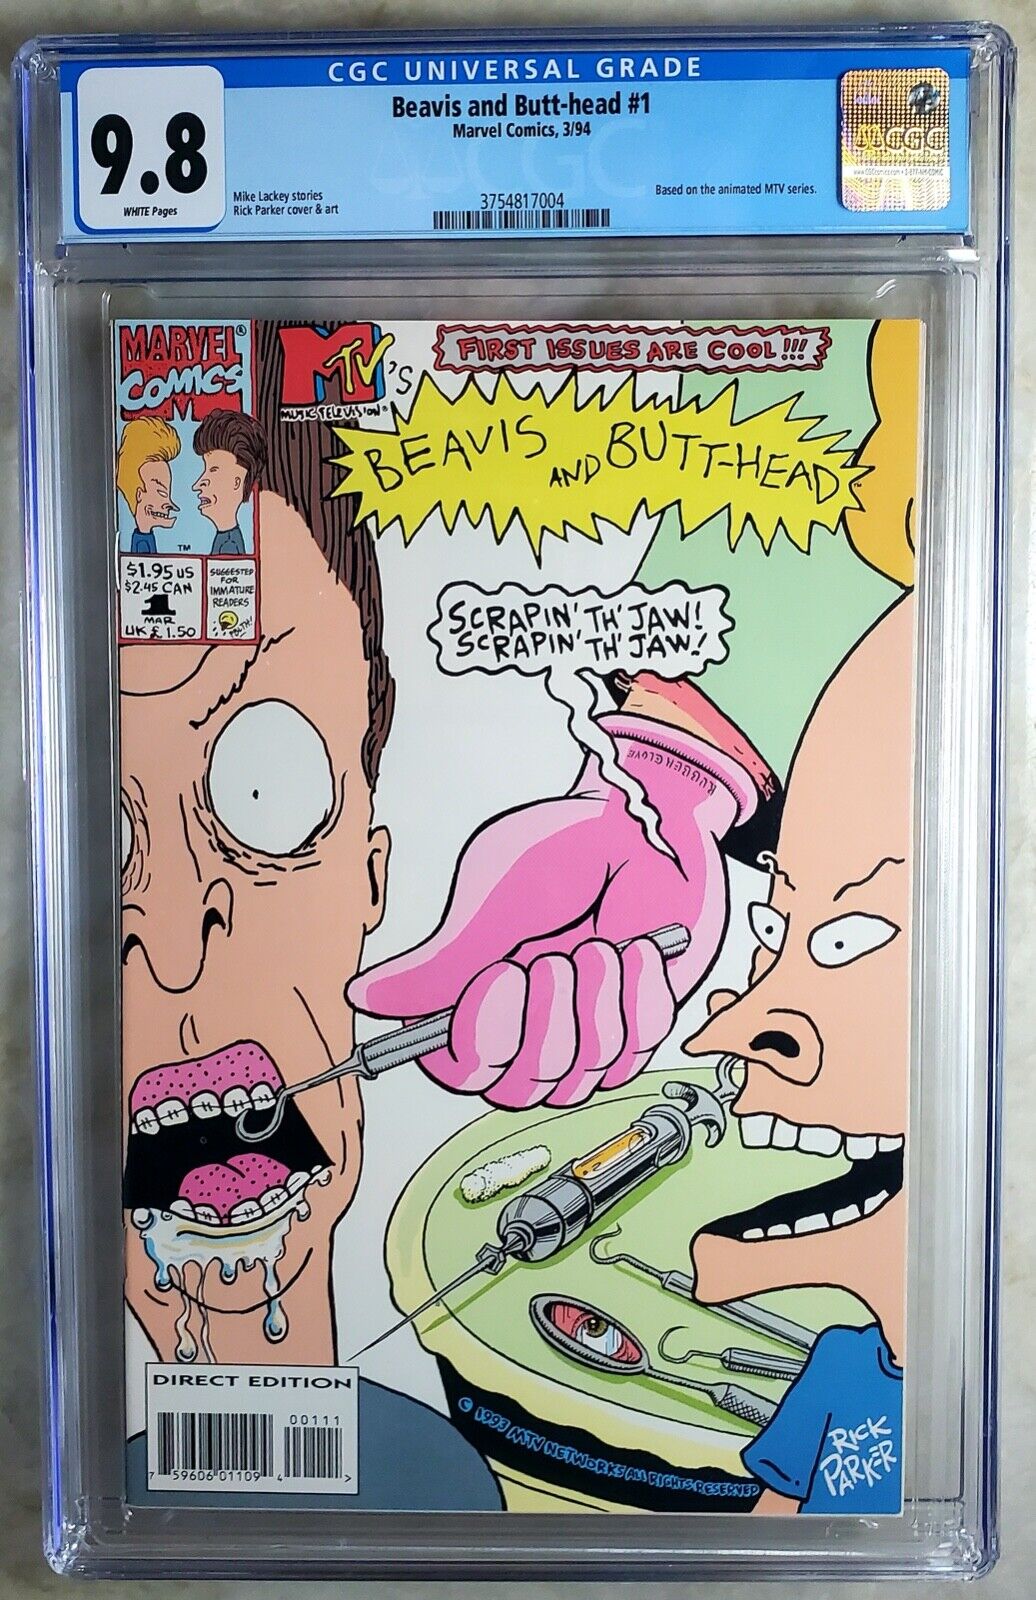 Beavis and Butt-head #1 Marvel 1994 CGC 9.8 NM/MT White Pages Comic R0061